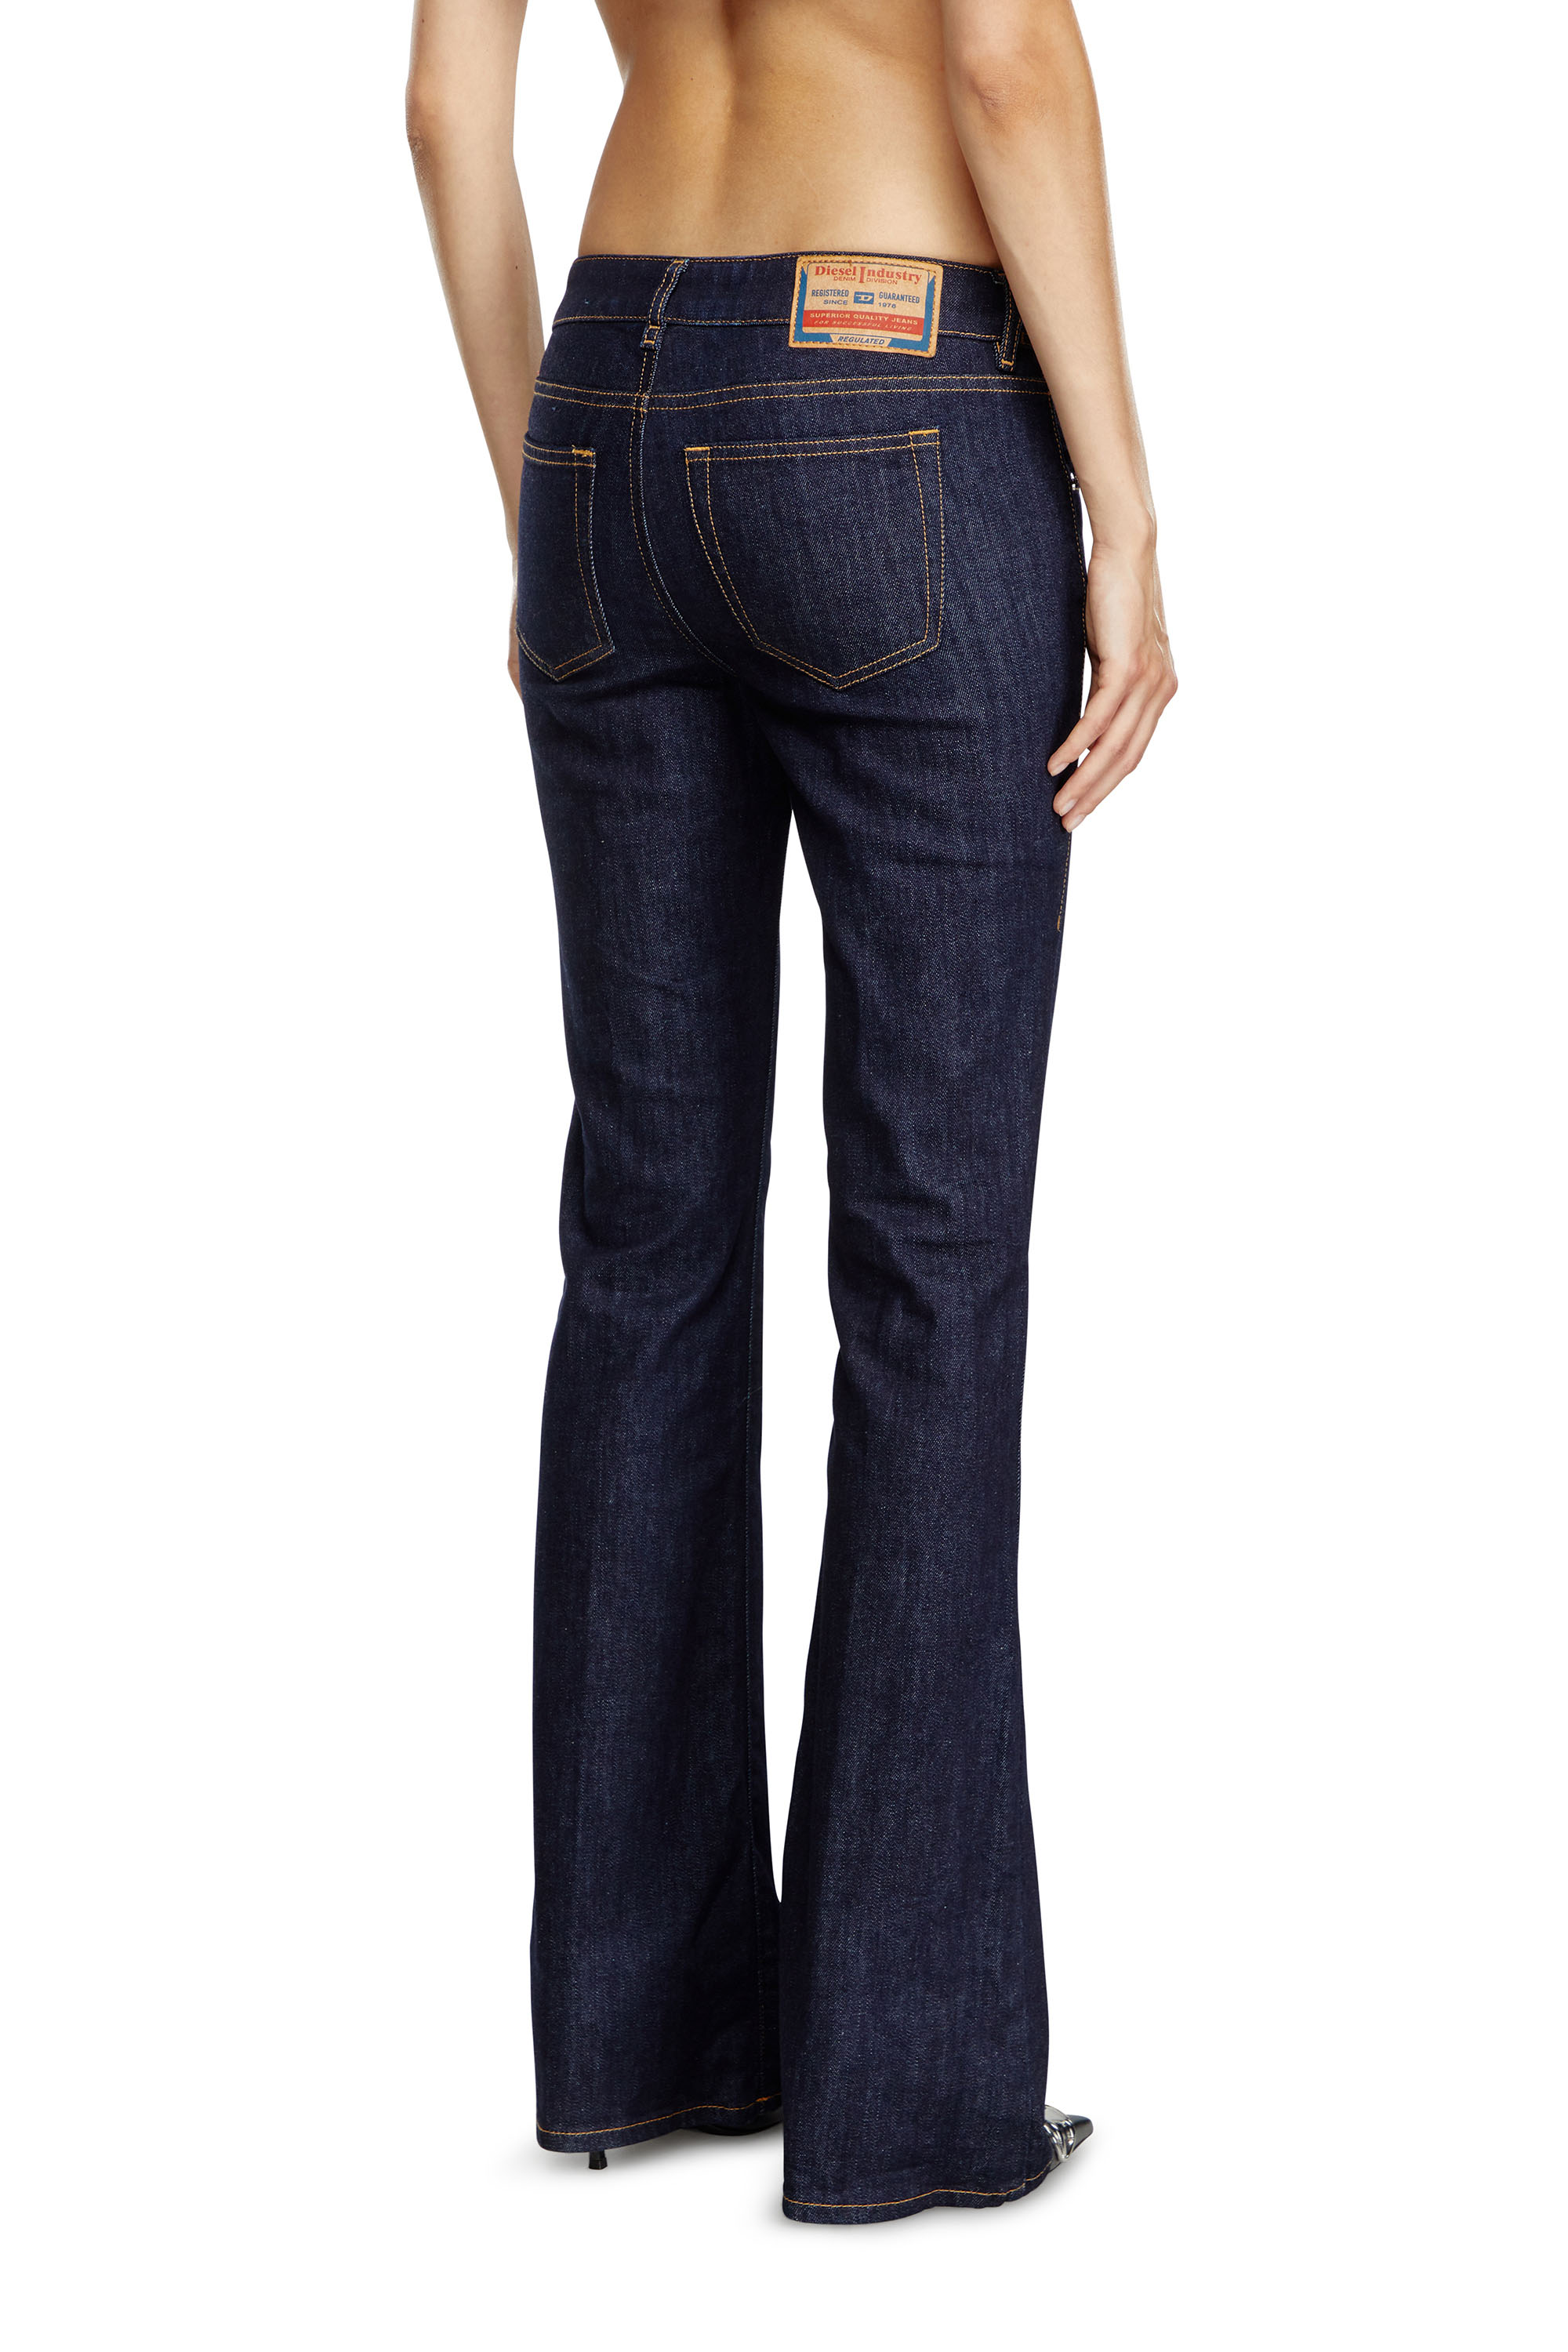 Diesel - Bootcut and Flare Jeans 1969 D-Ebbey Z9B89, Mujer Bootcut y Flare Jeans - 1969 D-Ebbey in Azul marino - Image 4